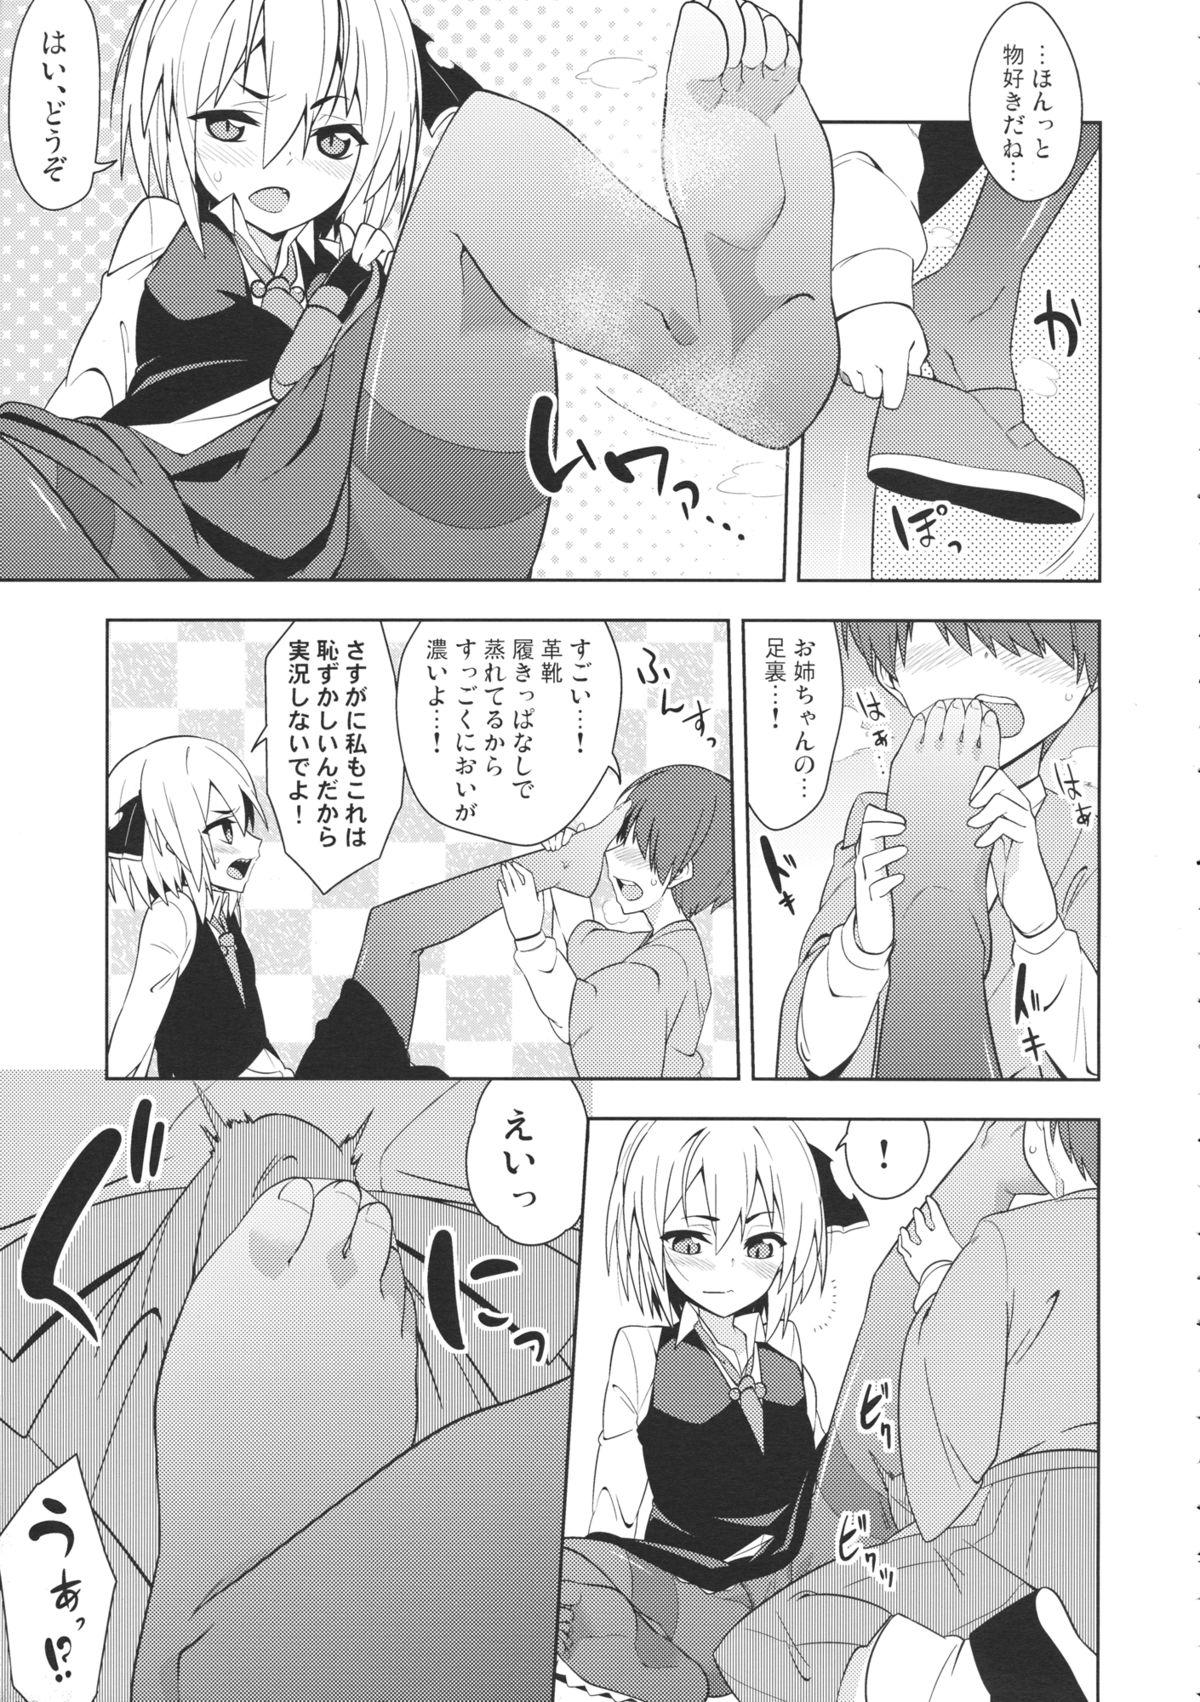 Neighbor Rumia Aratta? - Touhou project Phat - Page 6